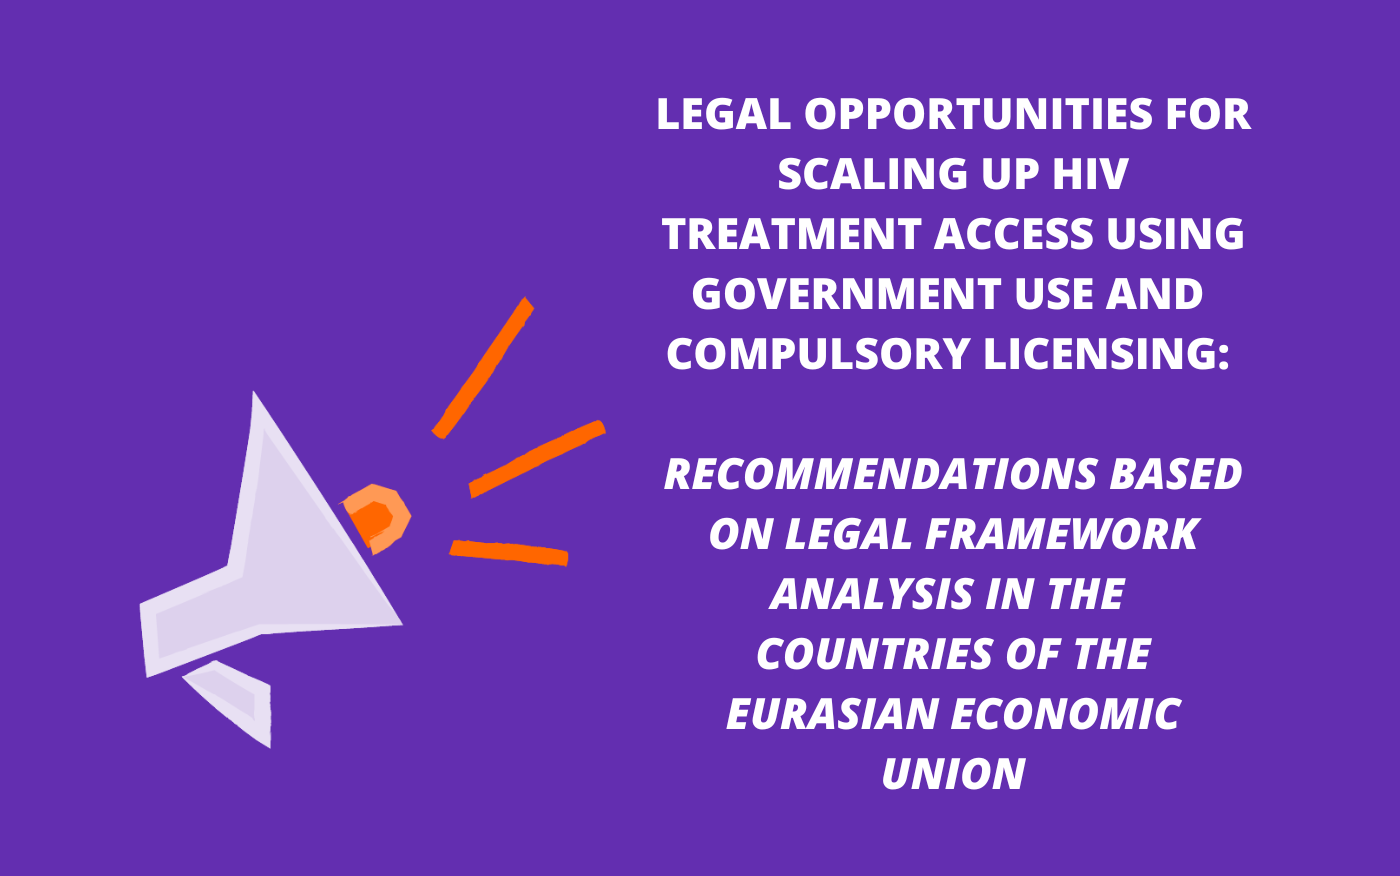 Legal opportunities for scaling up HIV treatment access using government use and compulsory licensing: recommendations based on legal framework analysis in the countries of the Eurasian Economic Union